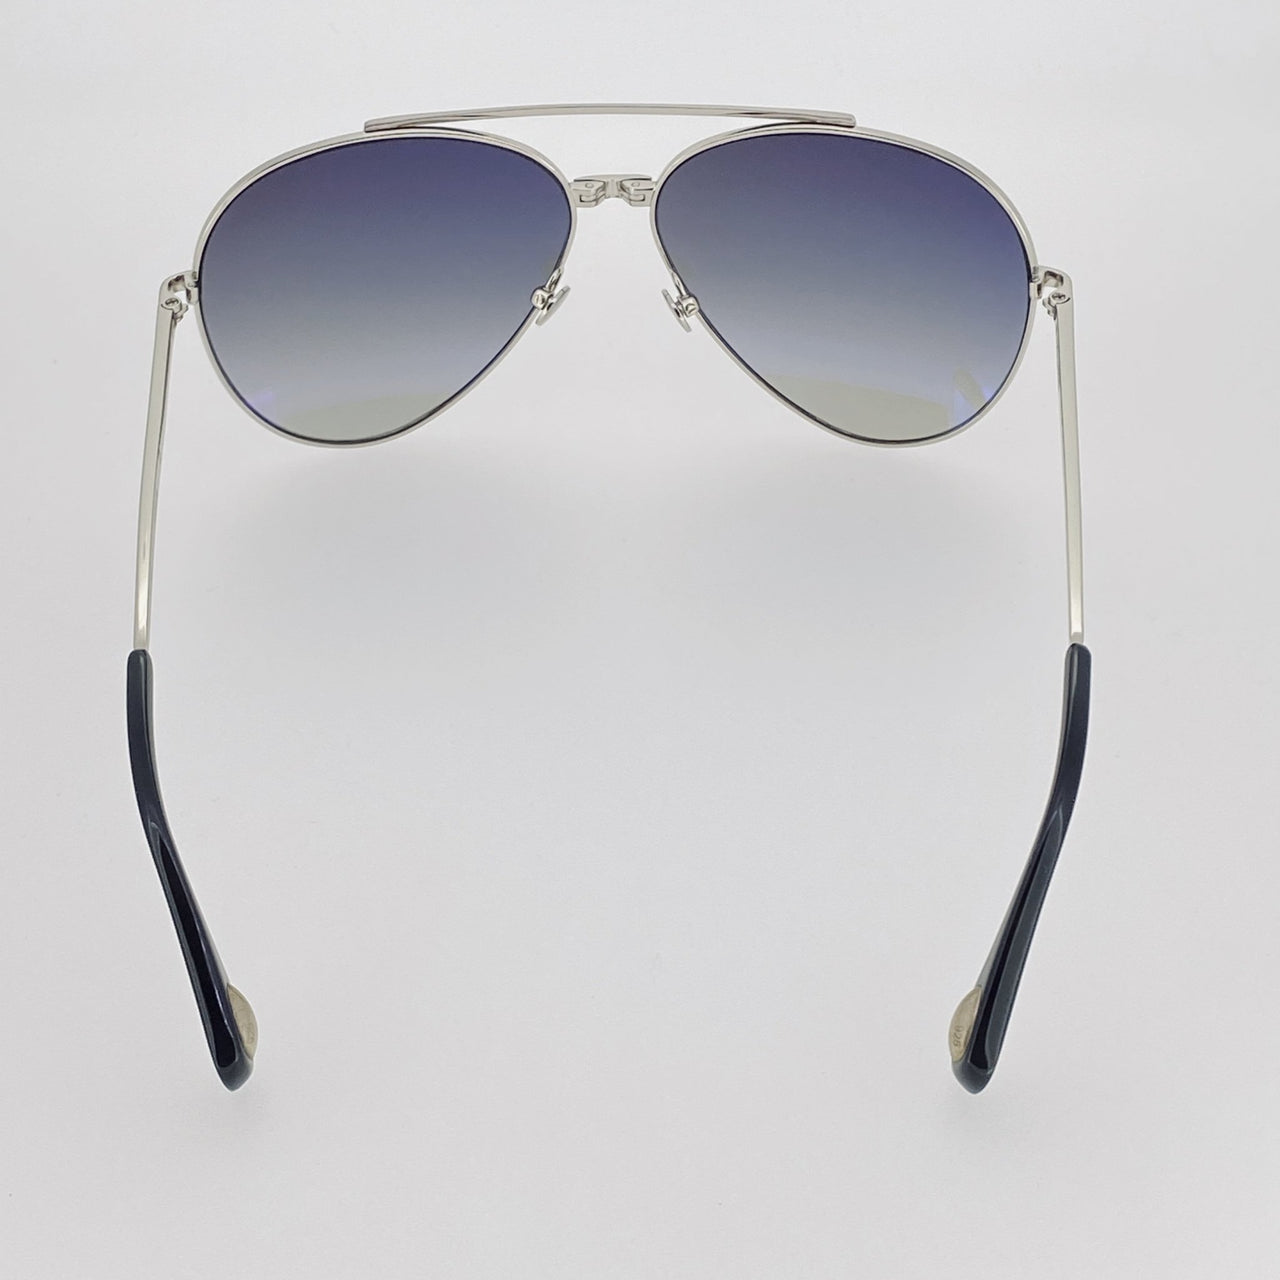 Ann Demeulemeester Sunglasses 925 Silver Titanium with Grey Lenses AD14C1SUN - Watches & Crystals